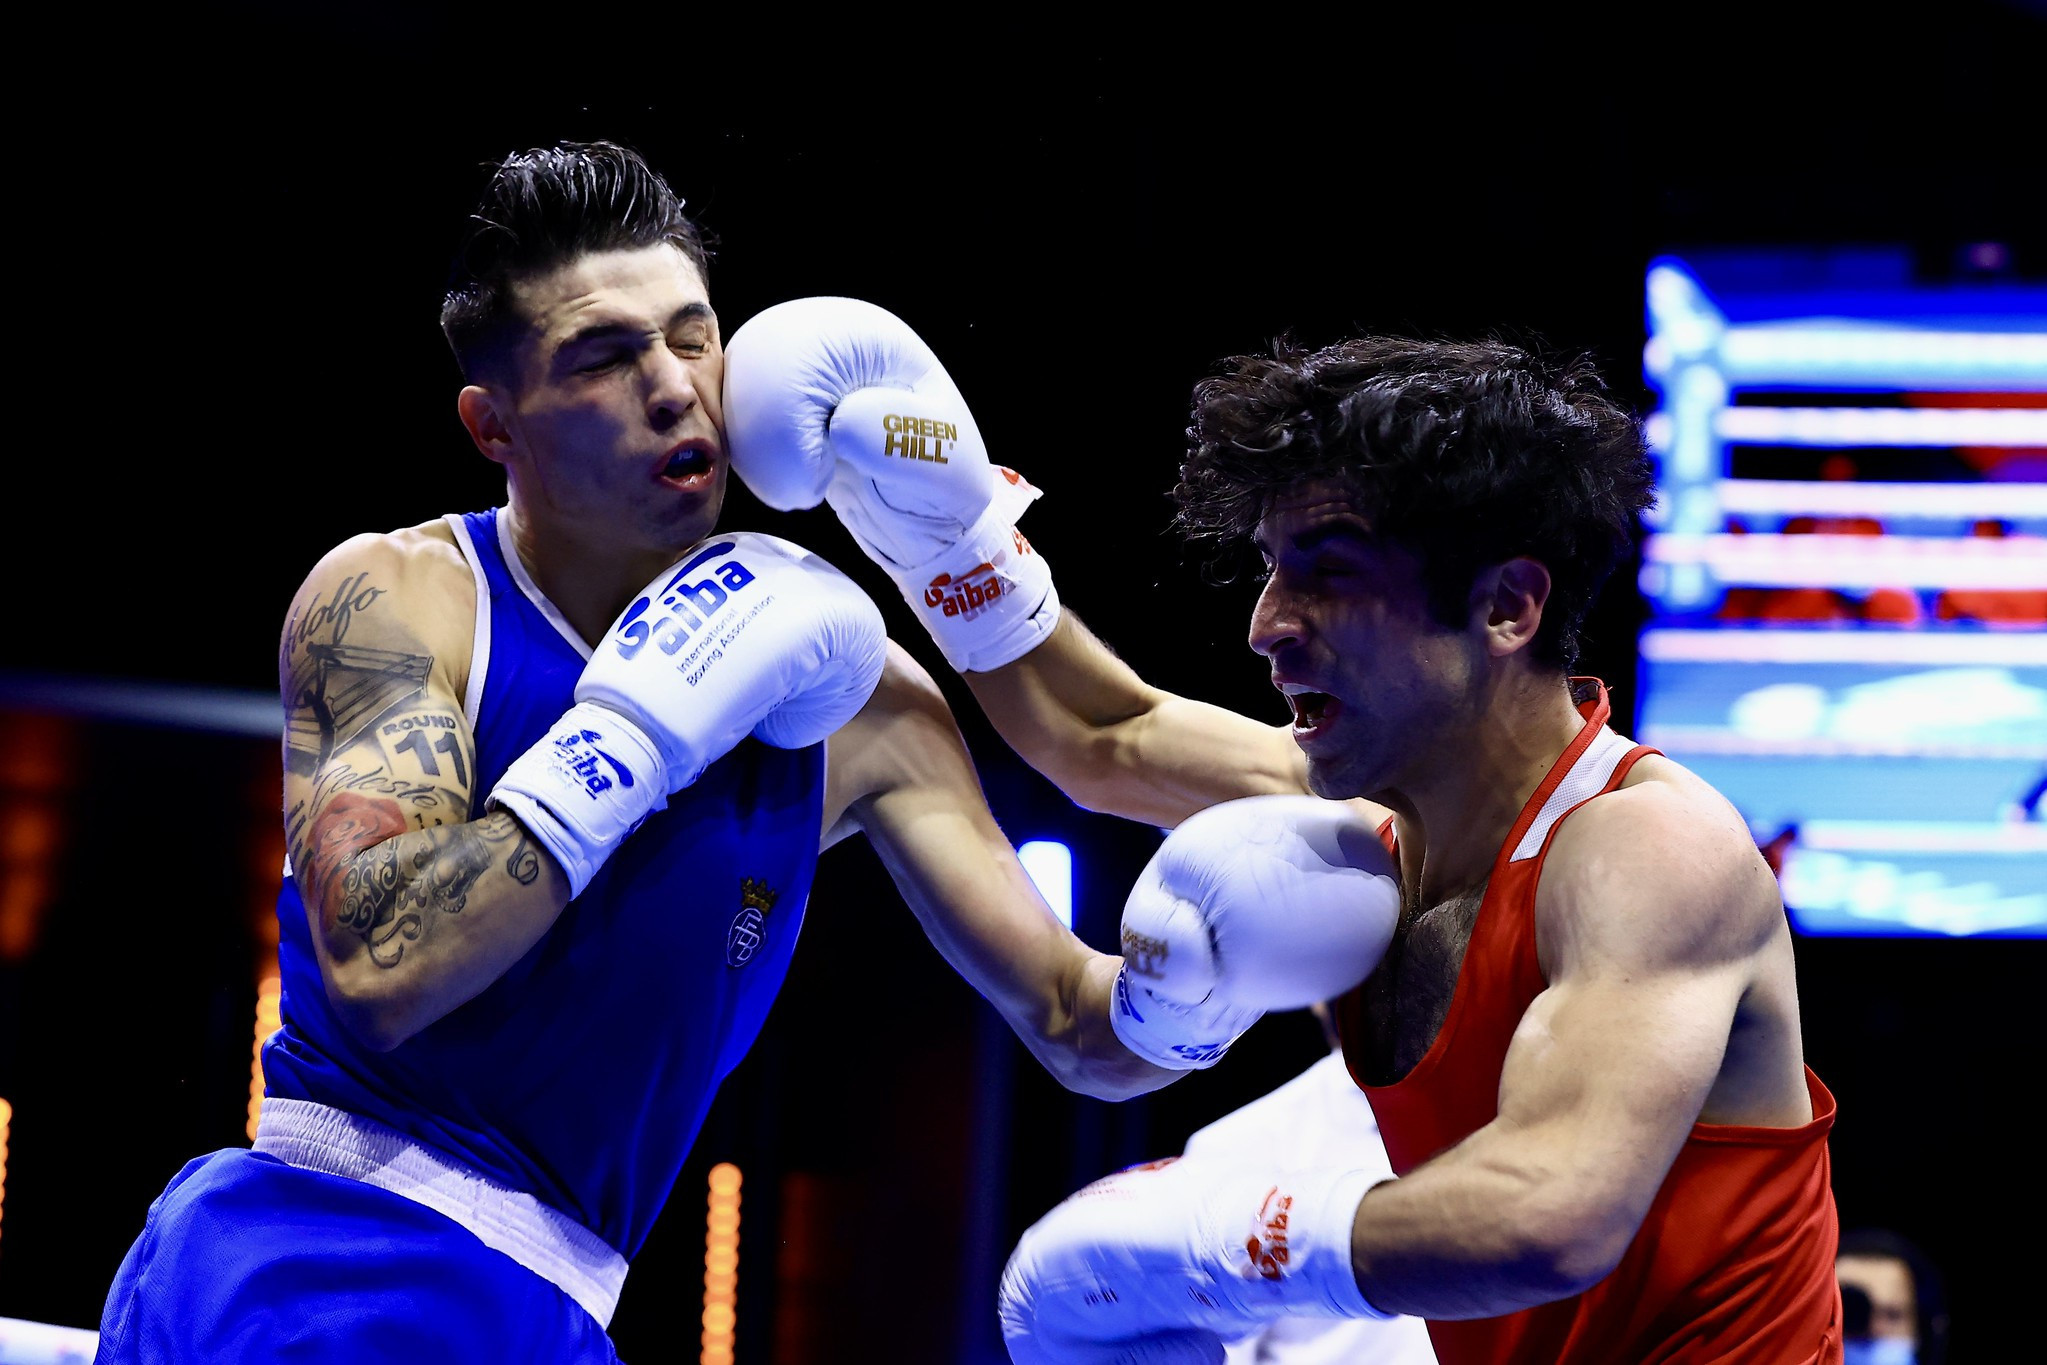 Turkey's Nurettin Ovat won the first bout of the night at the AIBA Men's World Boxing Championships ©AIBA